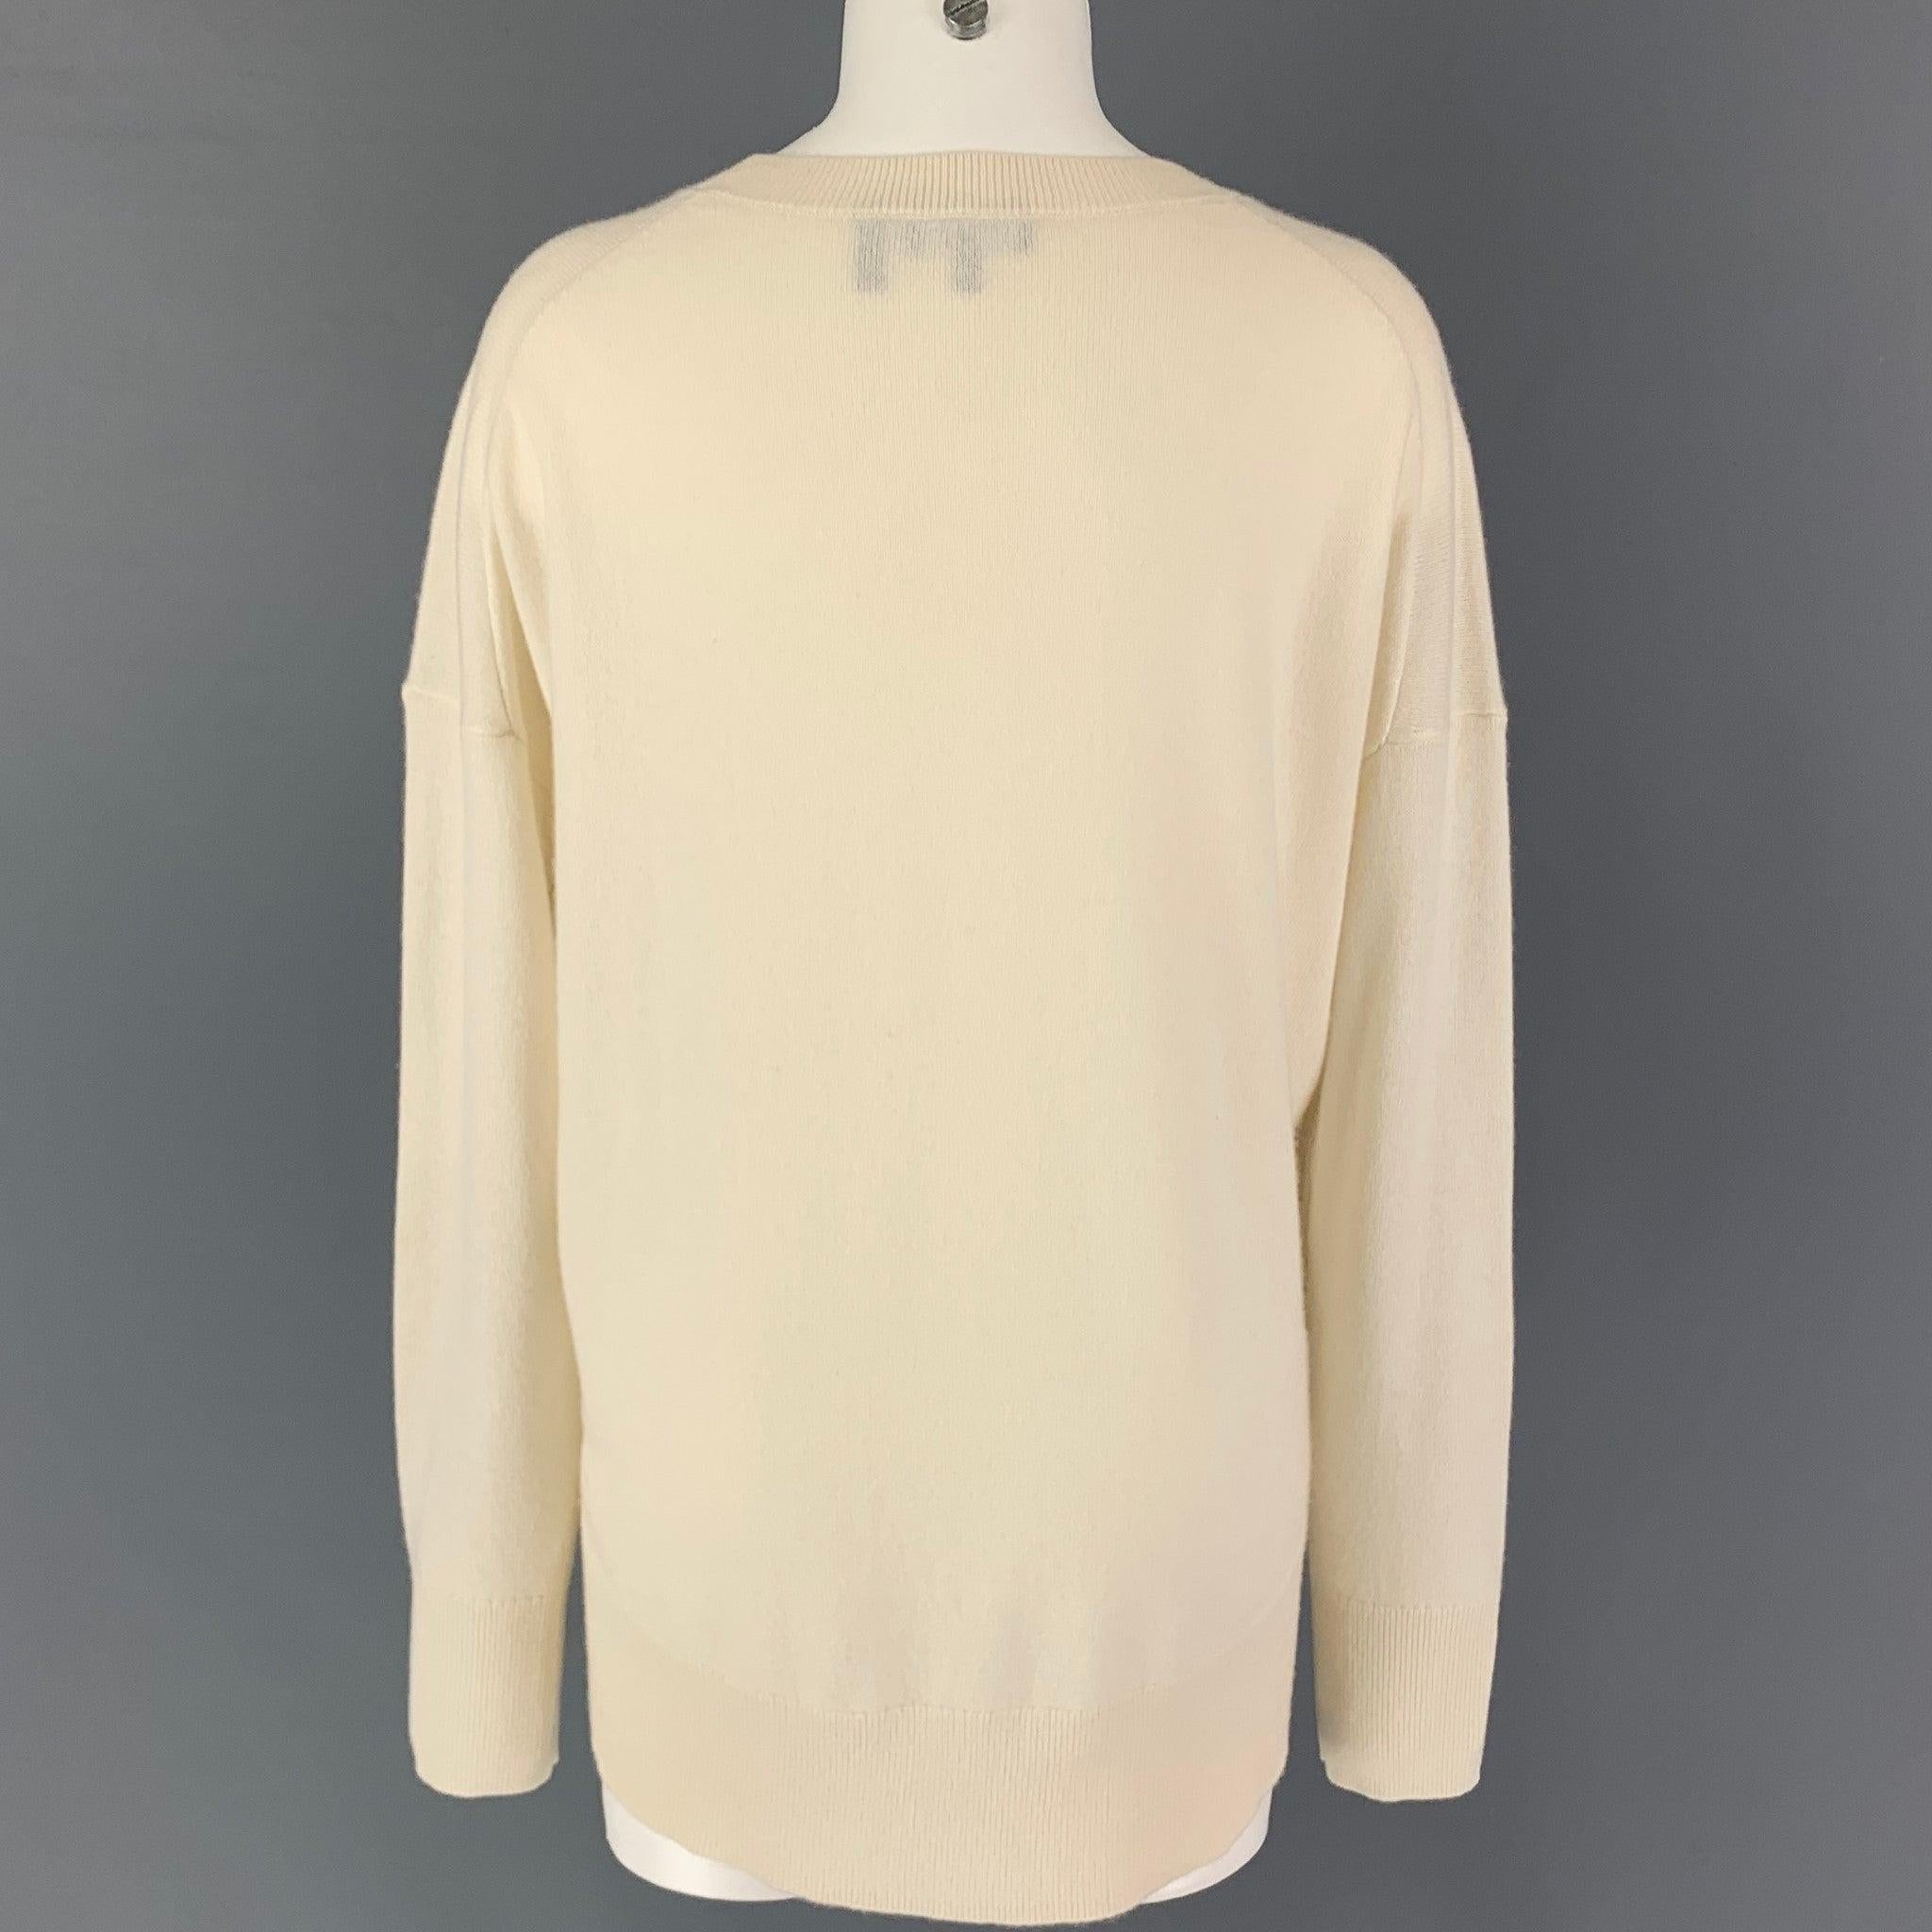 THEORY Size L Cream Cashmere Sweater In Good Condition For Sale In San Francisco, CA